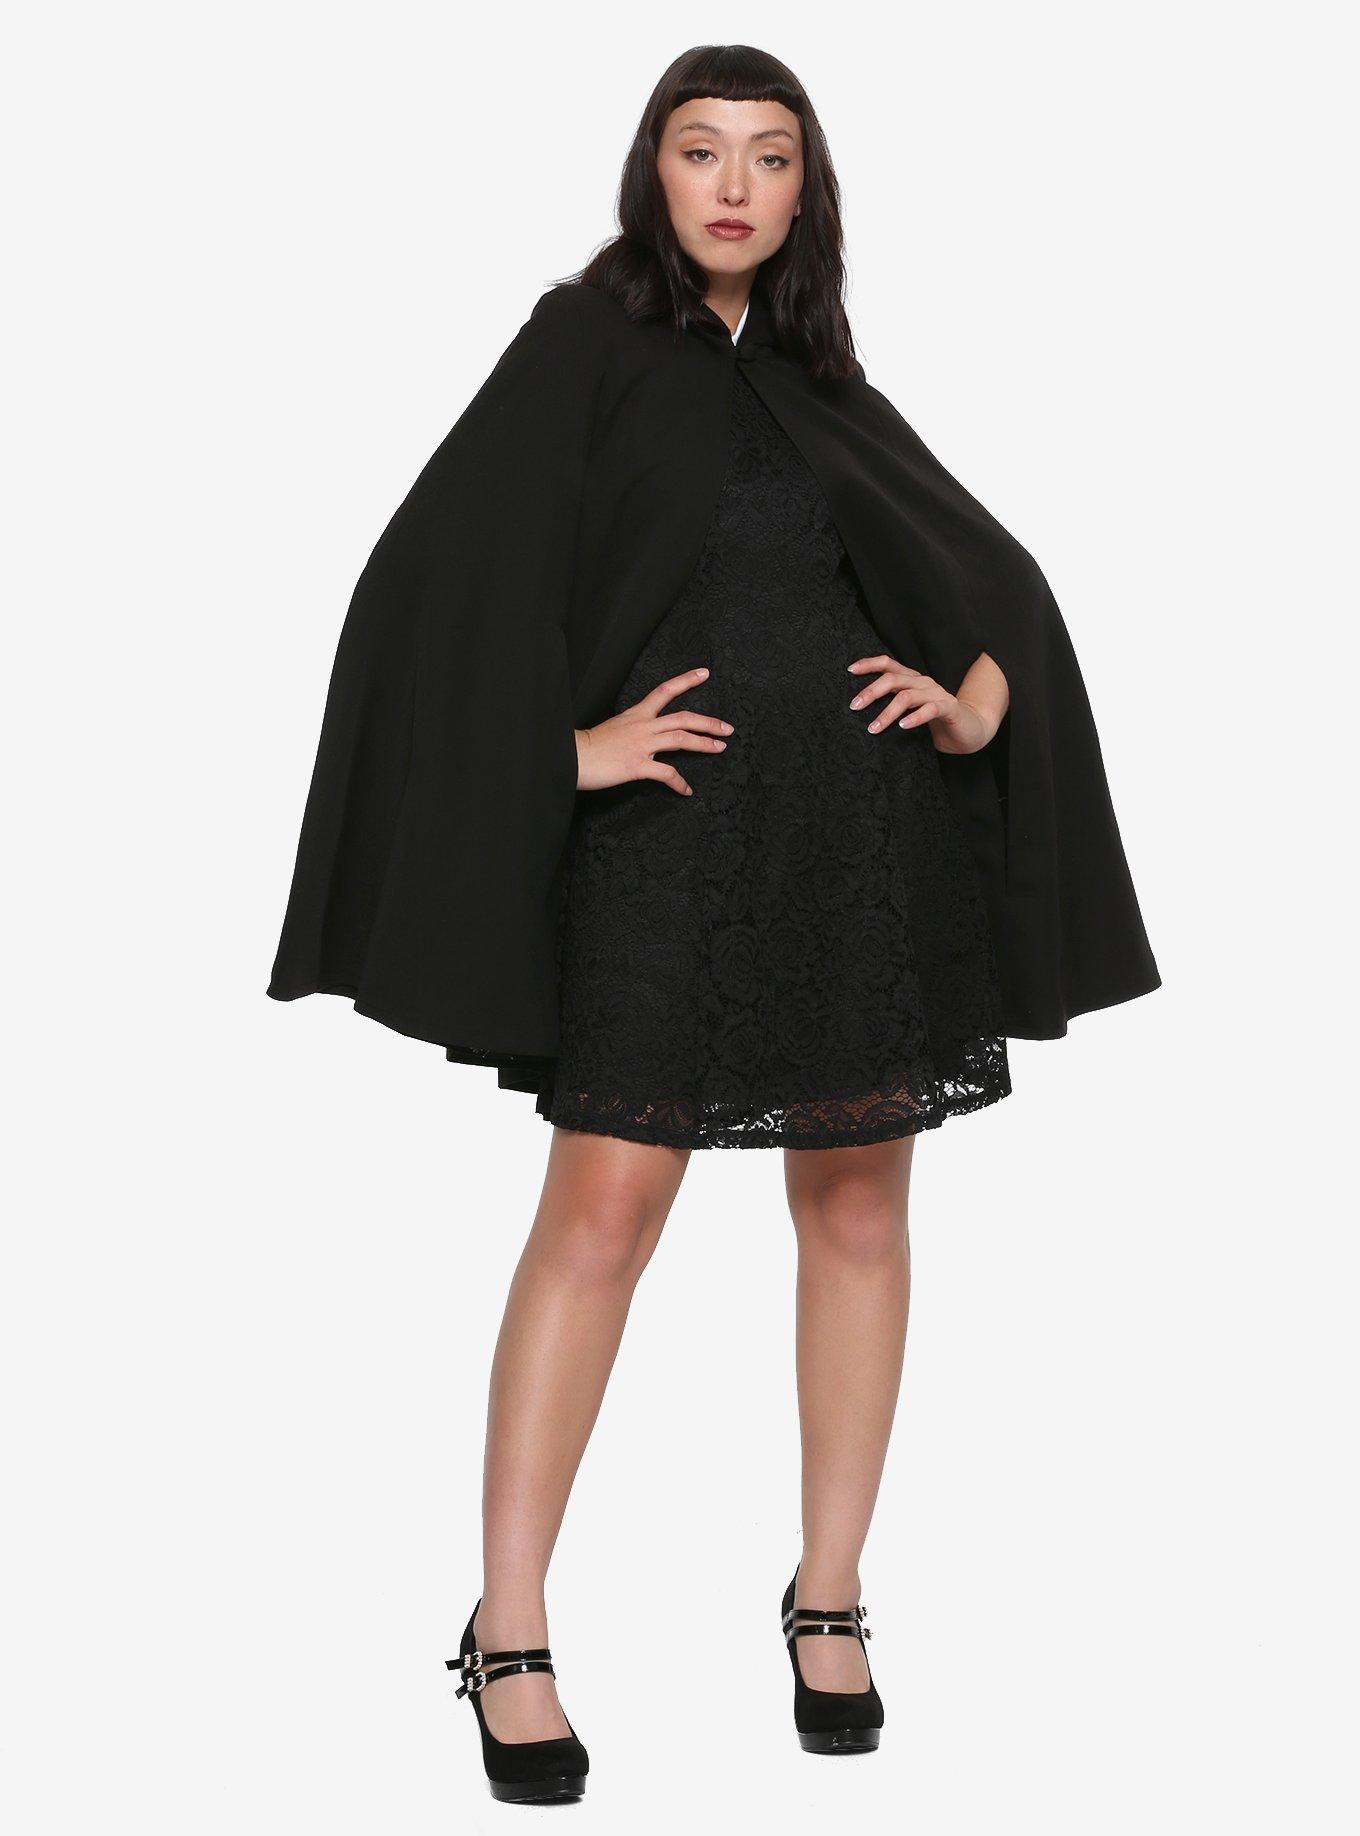 Riverdale Veronica Lodge Black Hooded Cape Hot Topic Exclusive, , alternate